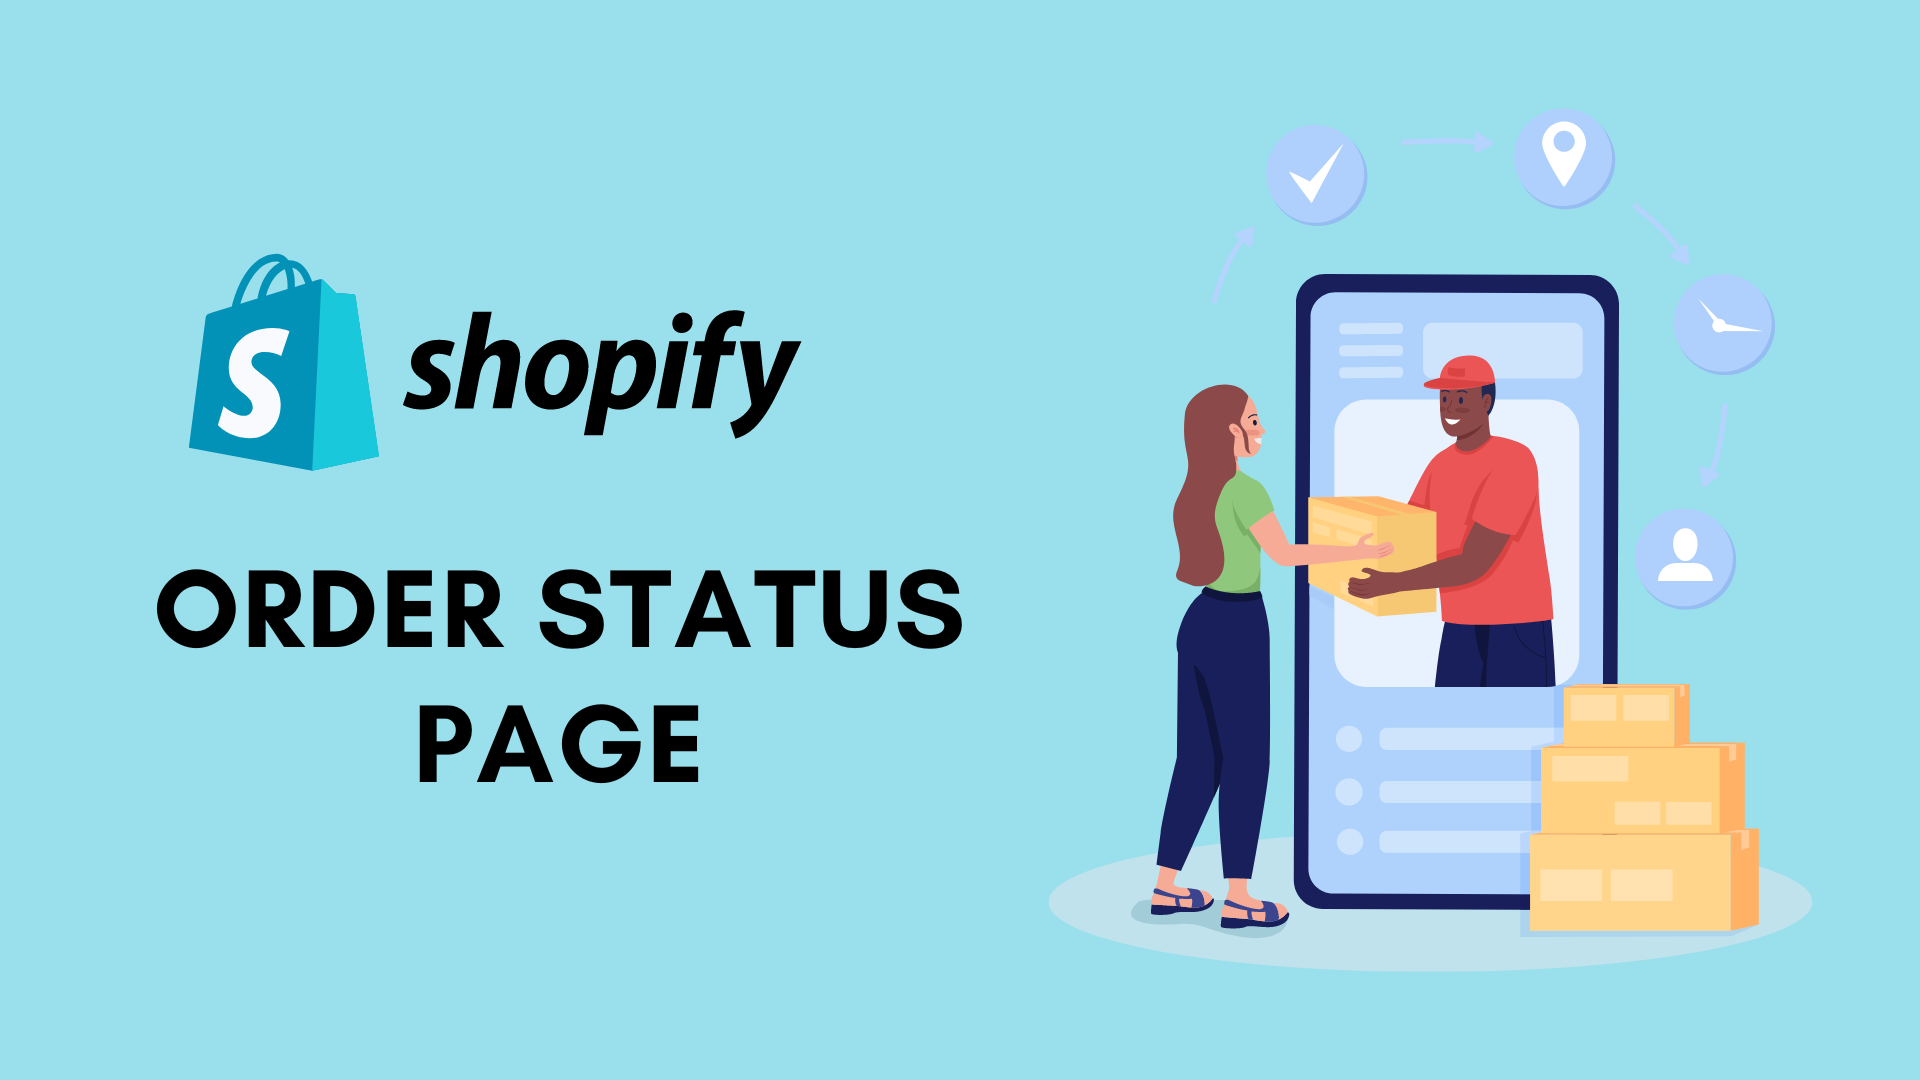 How to customize and view the order status page on your Shopify store